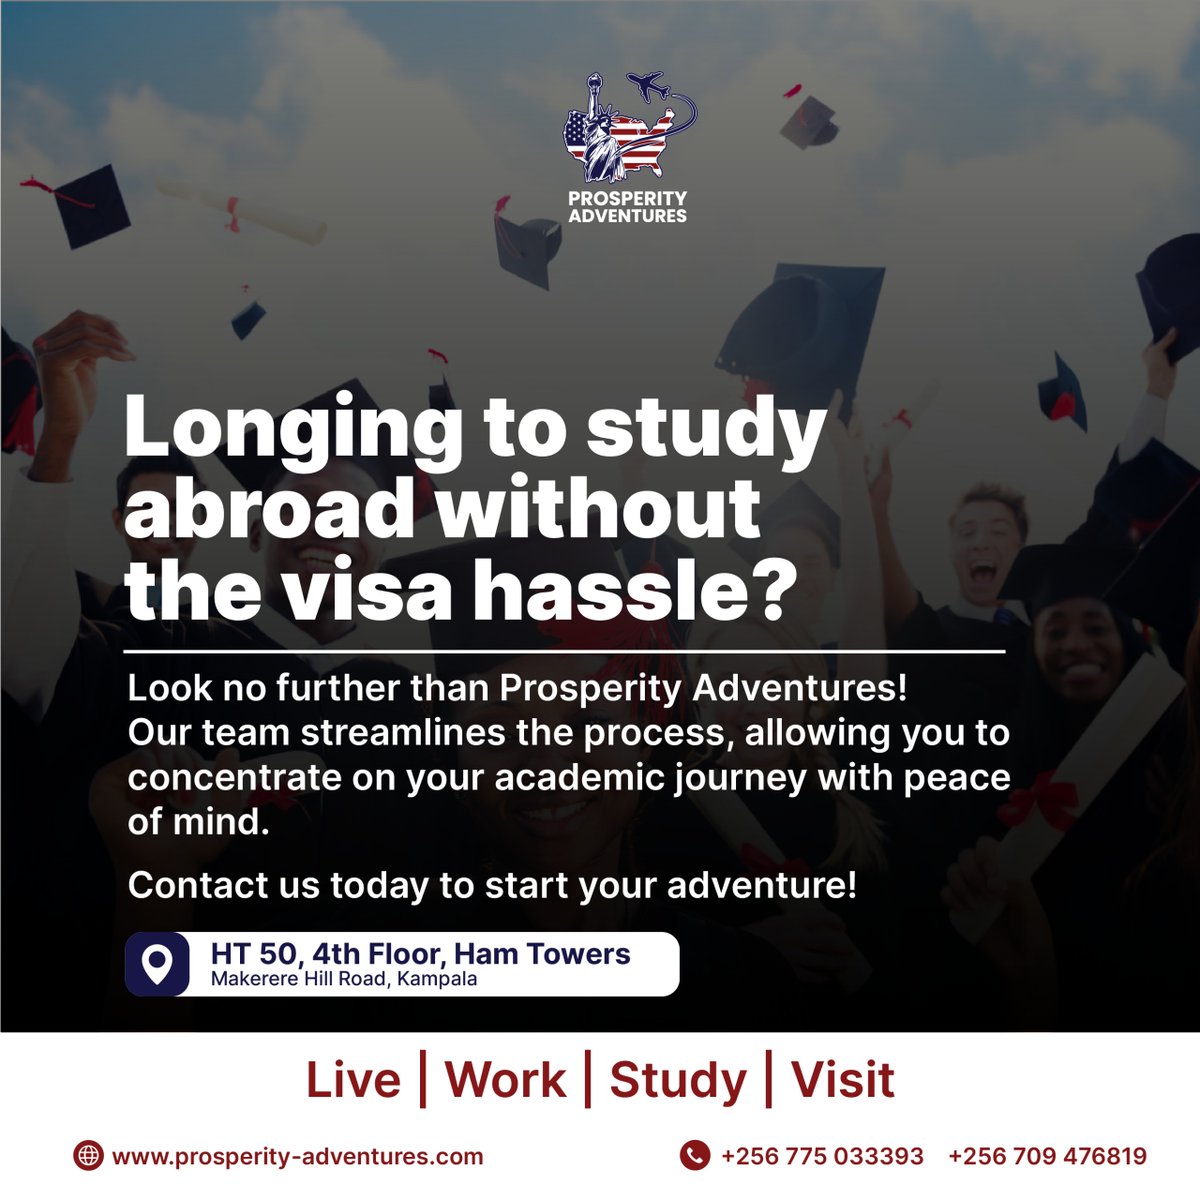 start your travel adventure today.
#immigration #getstarted #labour #trend #studyvisa #workabroad #viral #studyabroad #immigrationconsultant #freevisaprocessing #trending #education